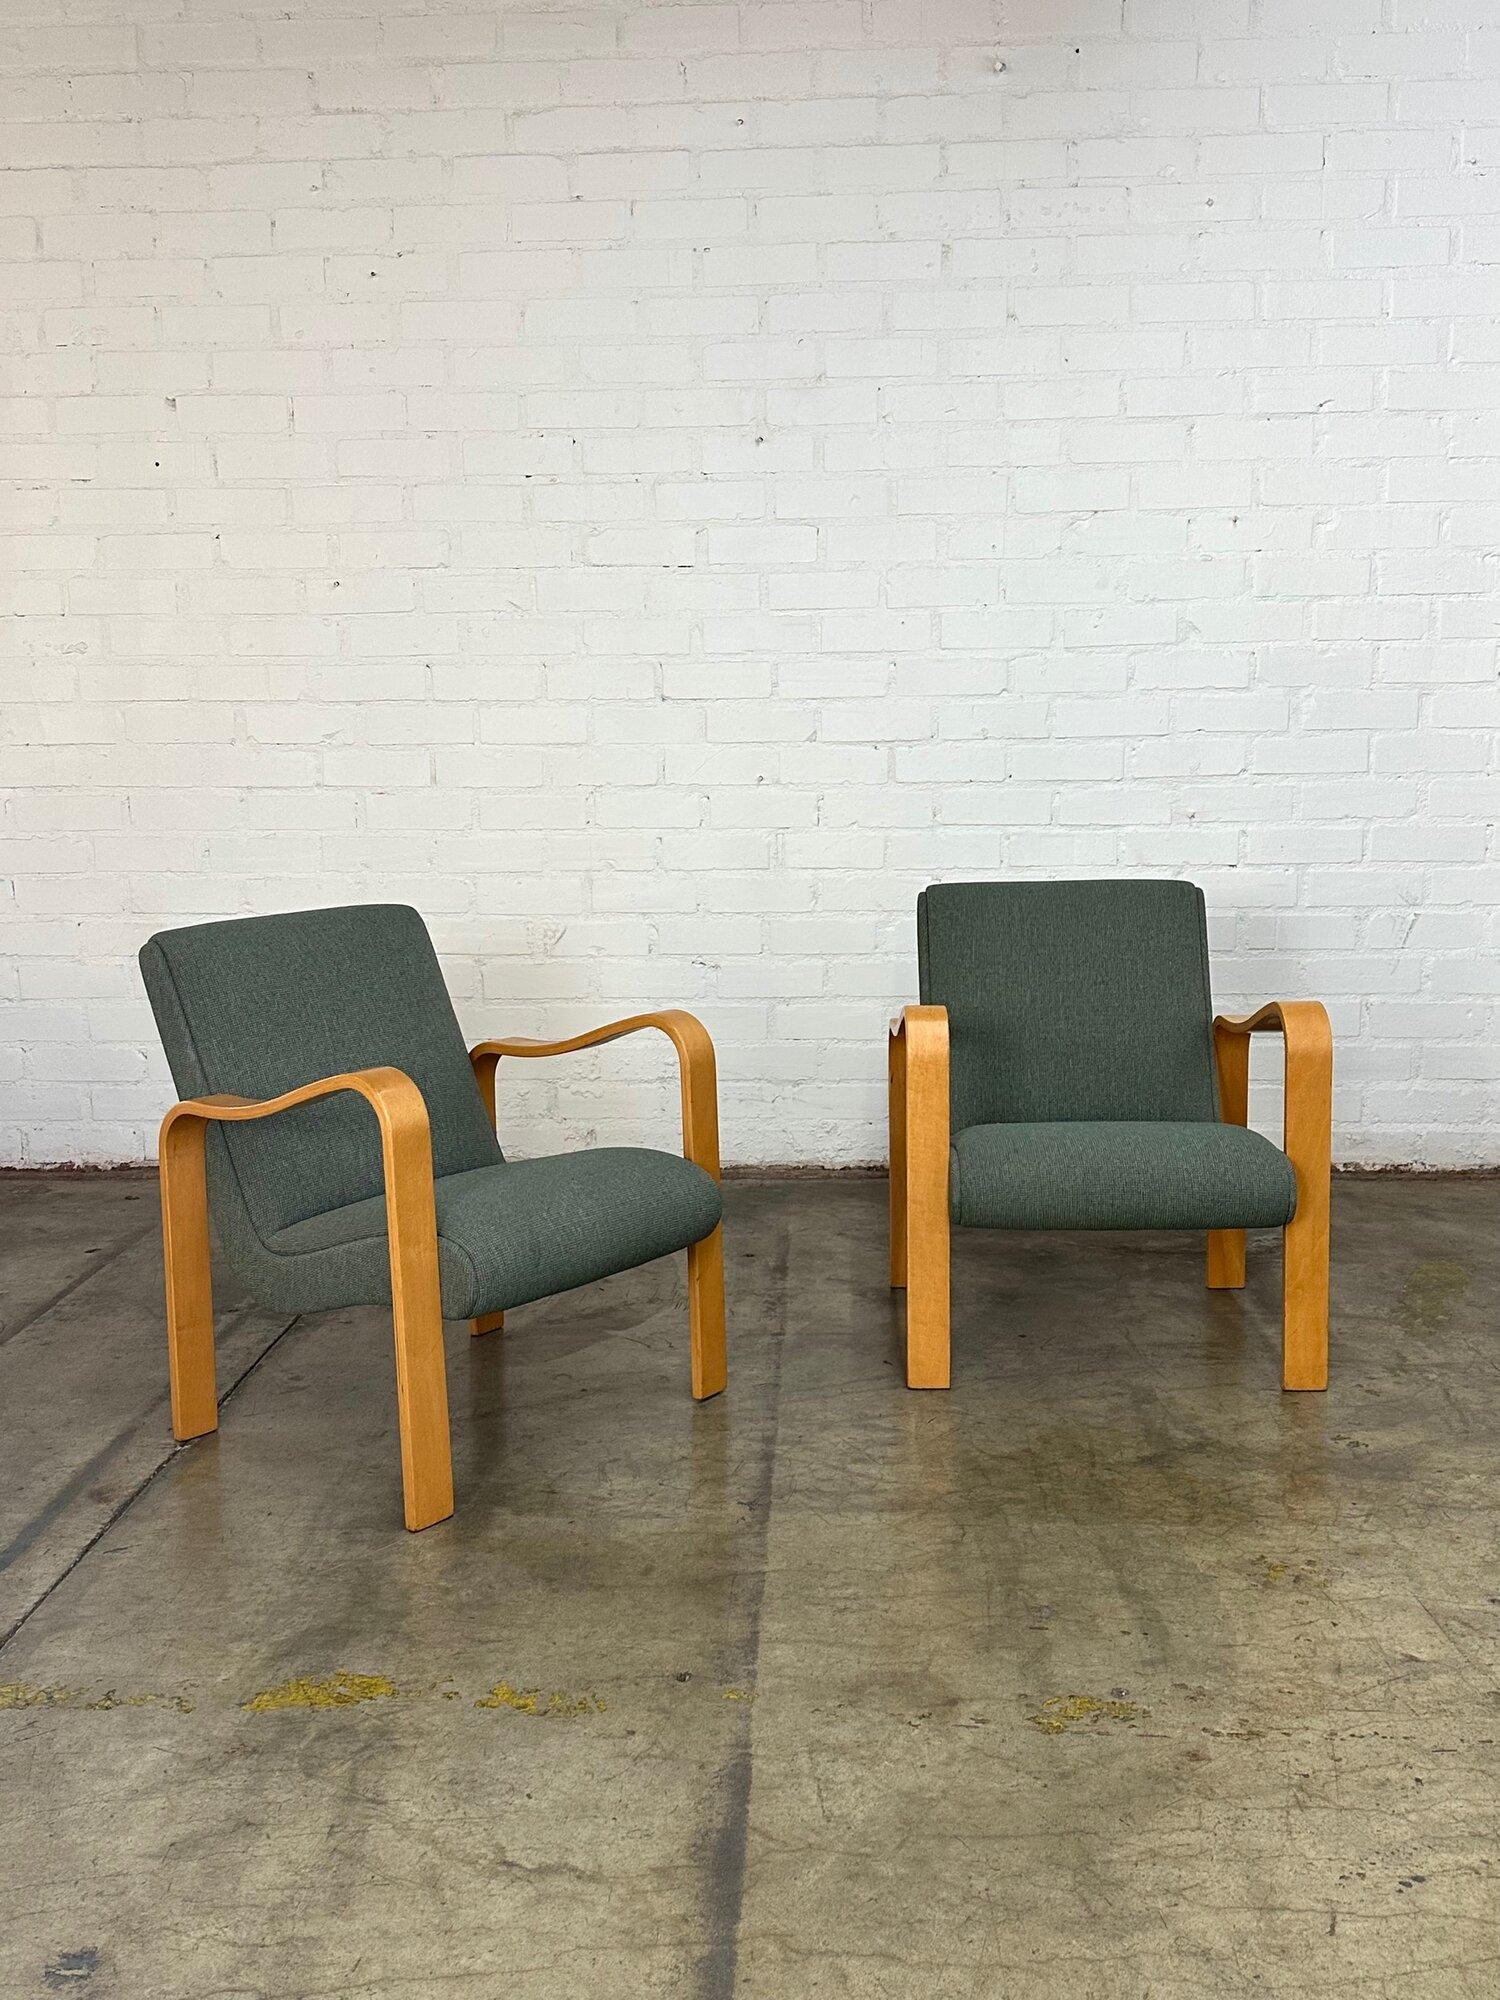 W27 D27 H30 SW21 SD19 SH16 AH24.5

Maple Bent Wood Thonet Style Lounge Chairs. Upholstered in muted teal fabric. Chairs feature bent wood maple arms. 

Price is for each chair*